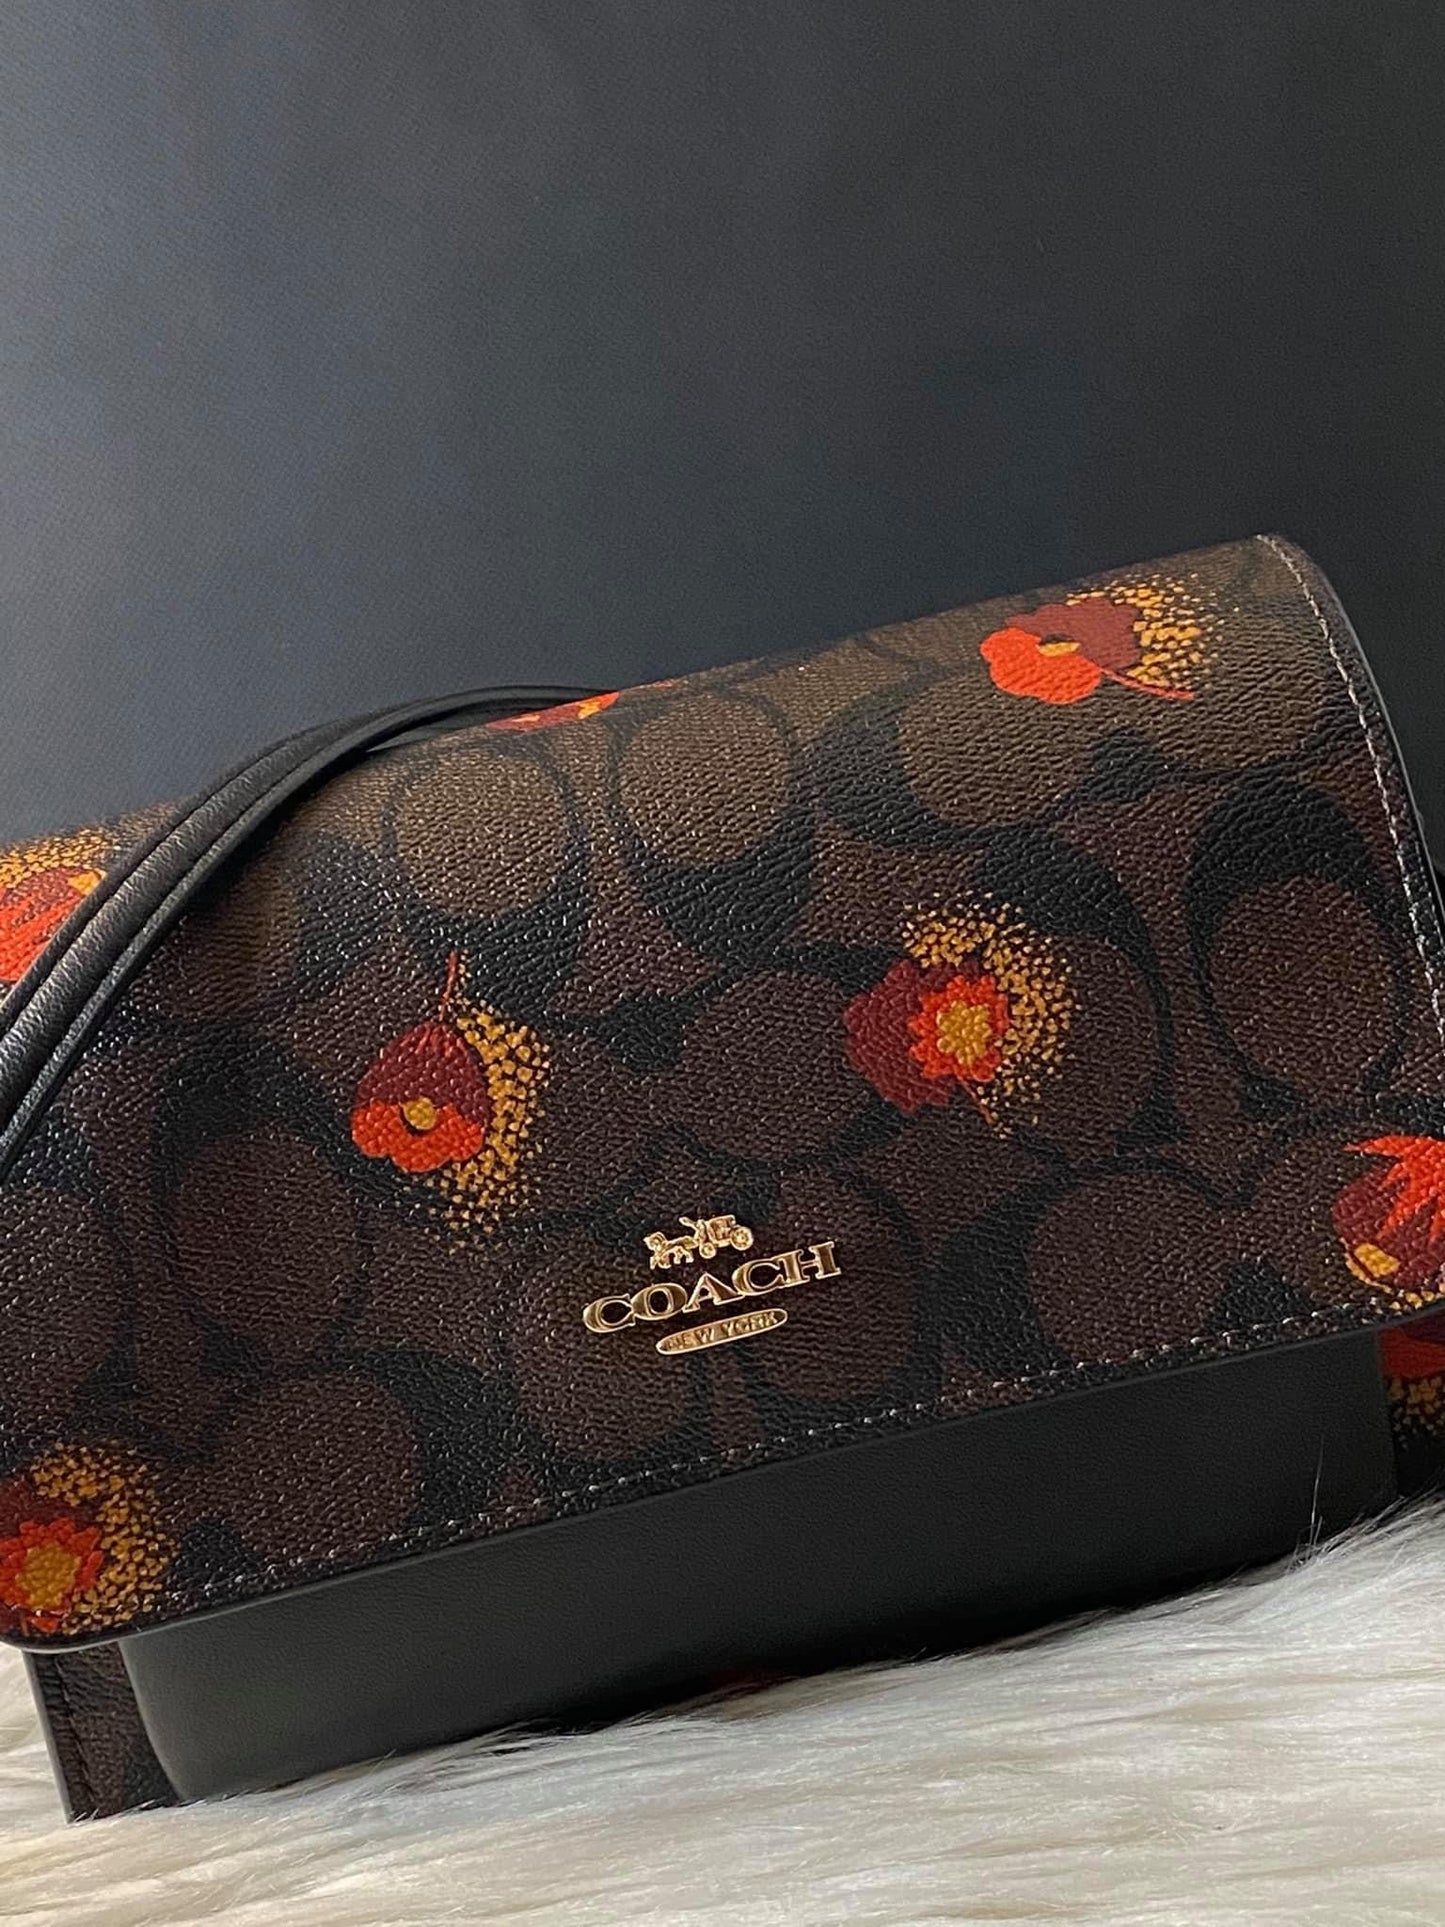 Coach Foldover Belt Bag in Signature Canvas with Pop Floral Print